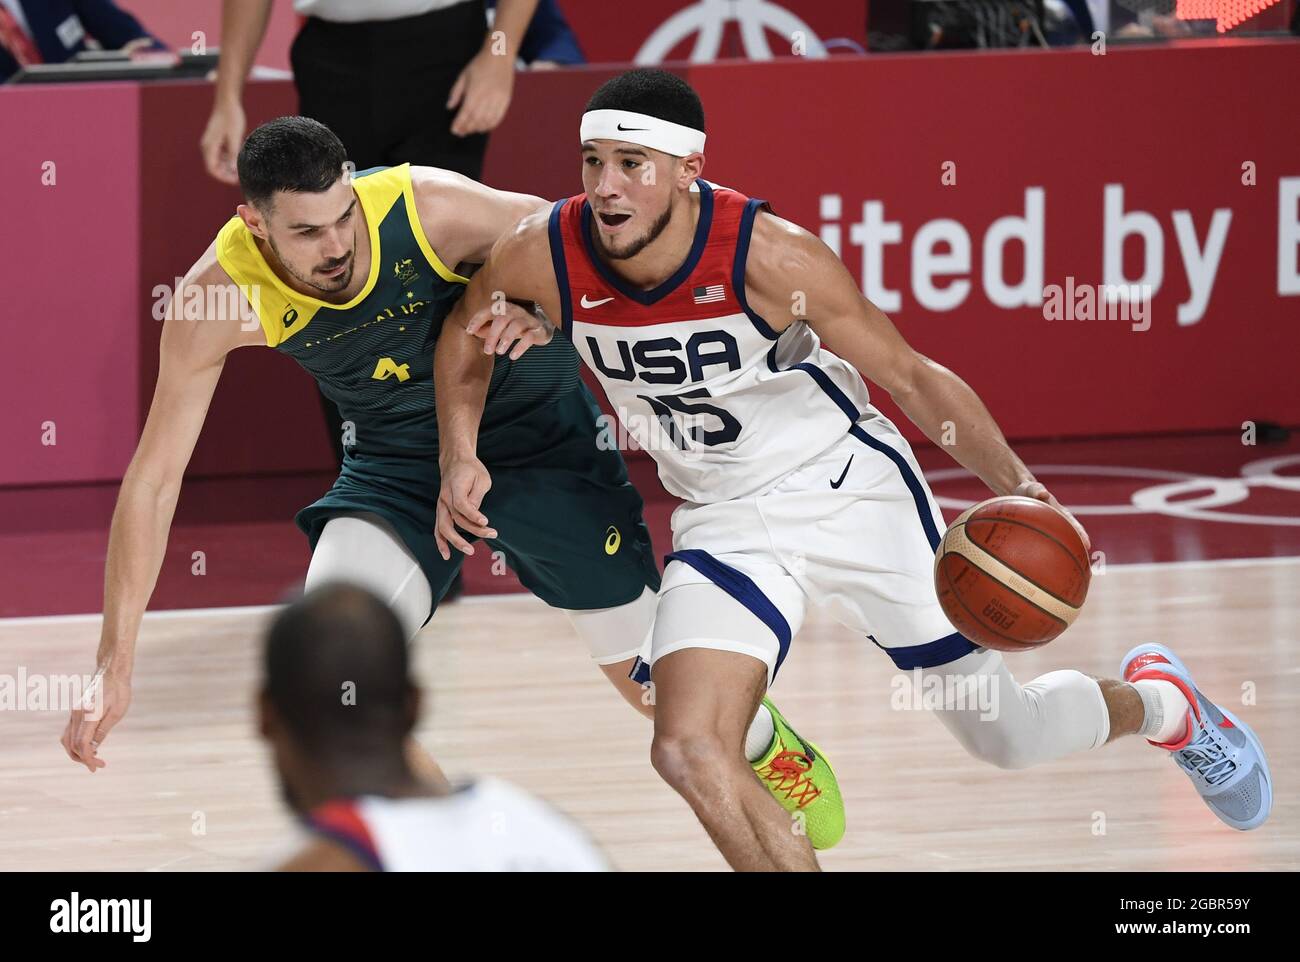 Tokyo, Japan. 05th Aug, 2021. United States' Devin Booker (R) is closely  guarded by Australia's Chris Goulding during Men's Basketball semifinal at  the Tokyo 2020 Olympics, Thursday, August 5, 2021, in Tokyo,